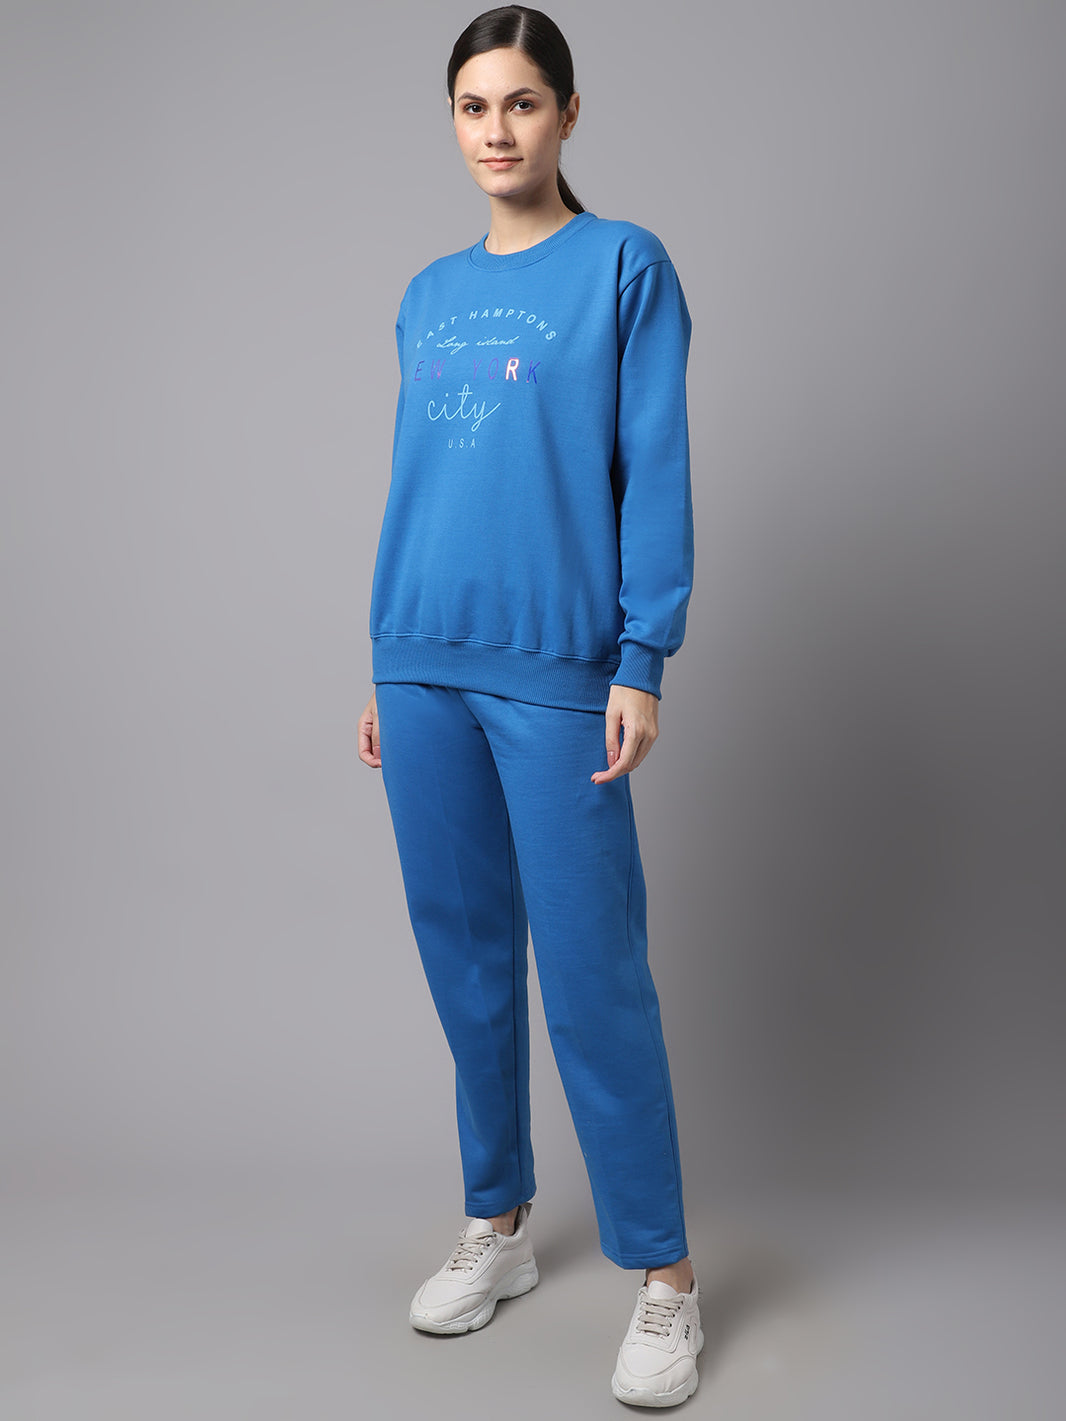 Ladies Full Sleeves Stylish Track Suit For Sports Wear at Best Price in New  Delhi